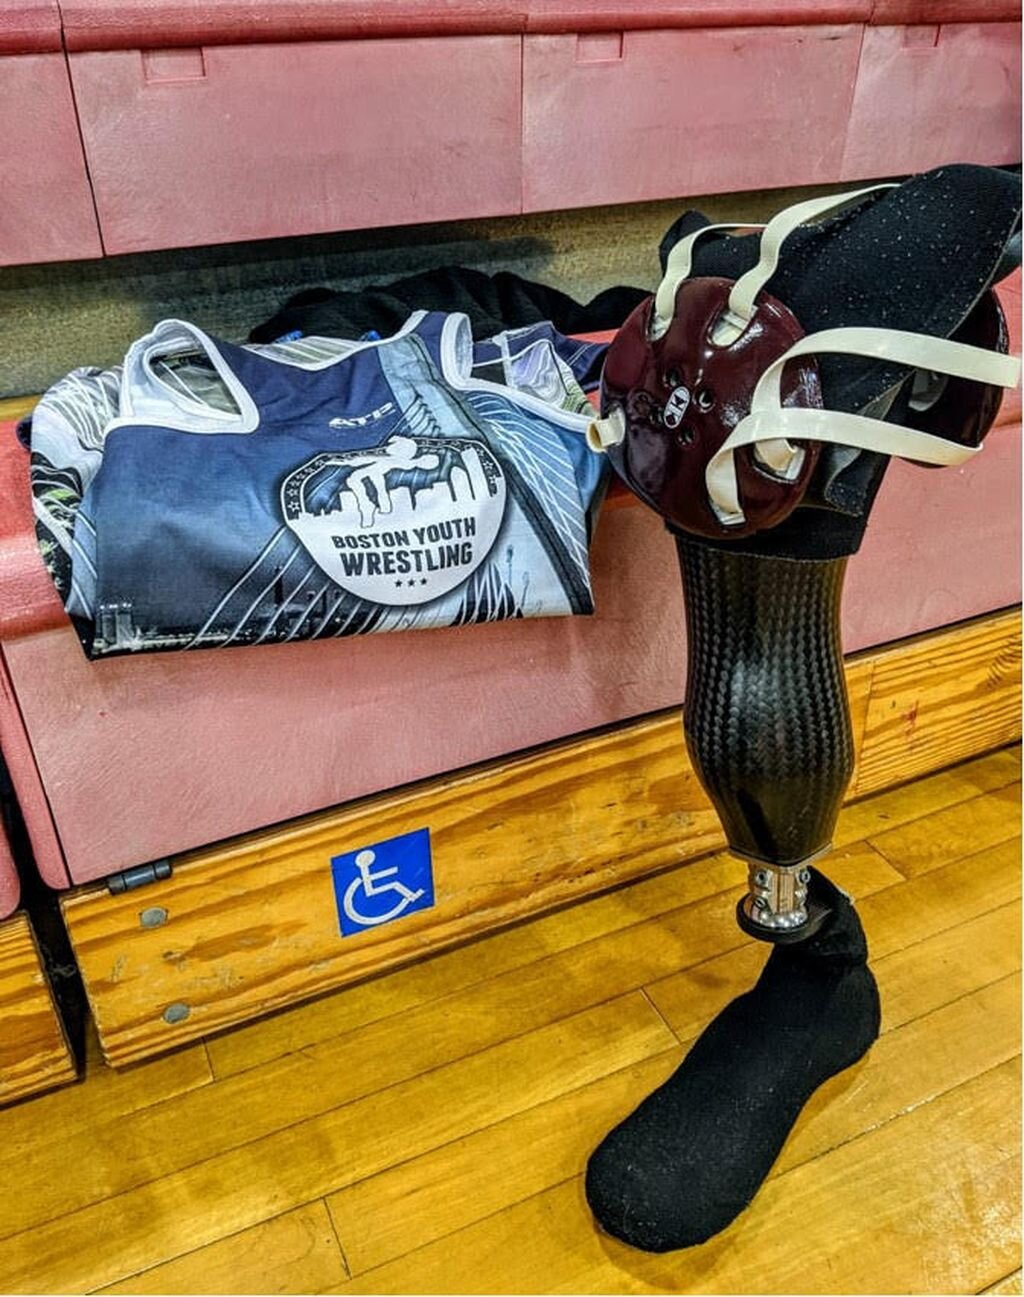 When Dorchester's Malaky Lewis is competing on the wrestling mat, he sheds his prosthetic right leg.COURTESY PHOTO